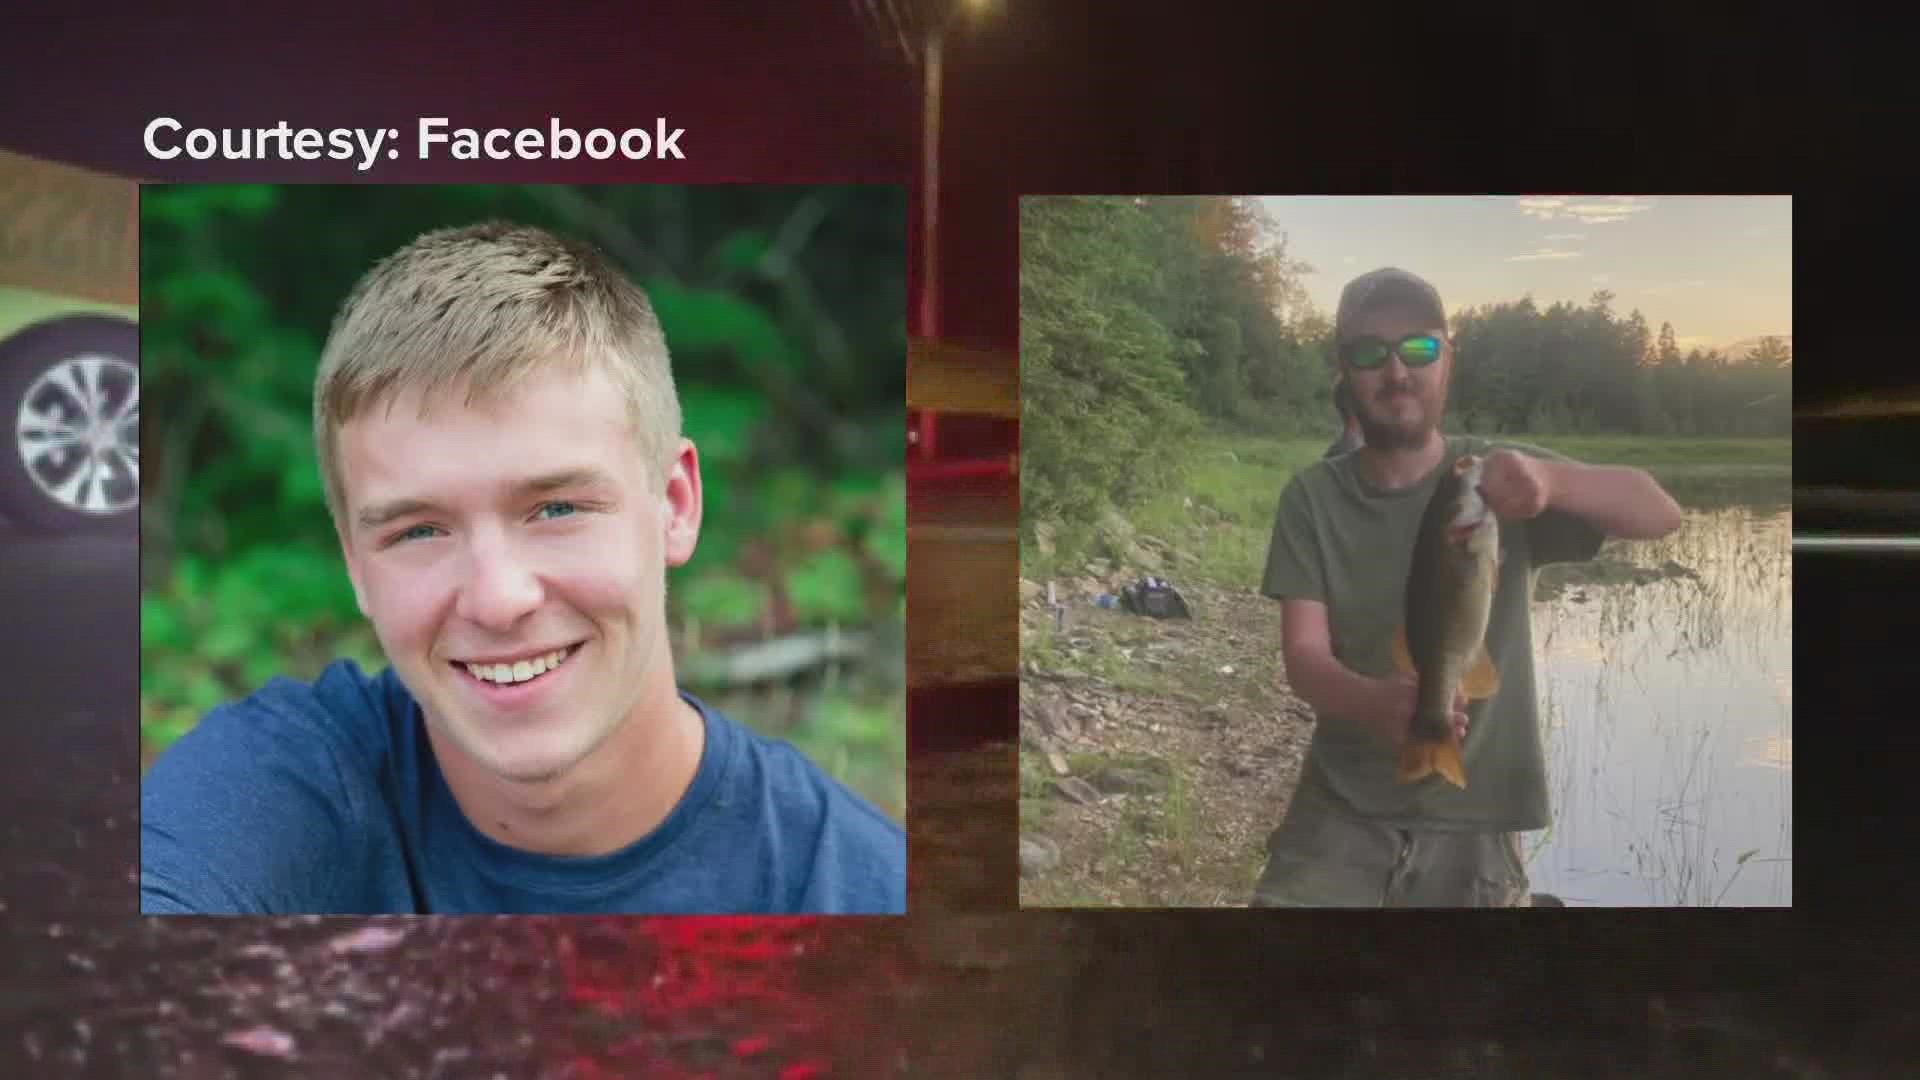 The two men killed in the crash have been identified as 23-year-old Tyler Wheaton of Hampden, and 22-year-old Christian Broberg of Winterport.